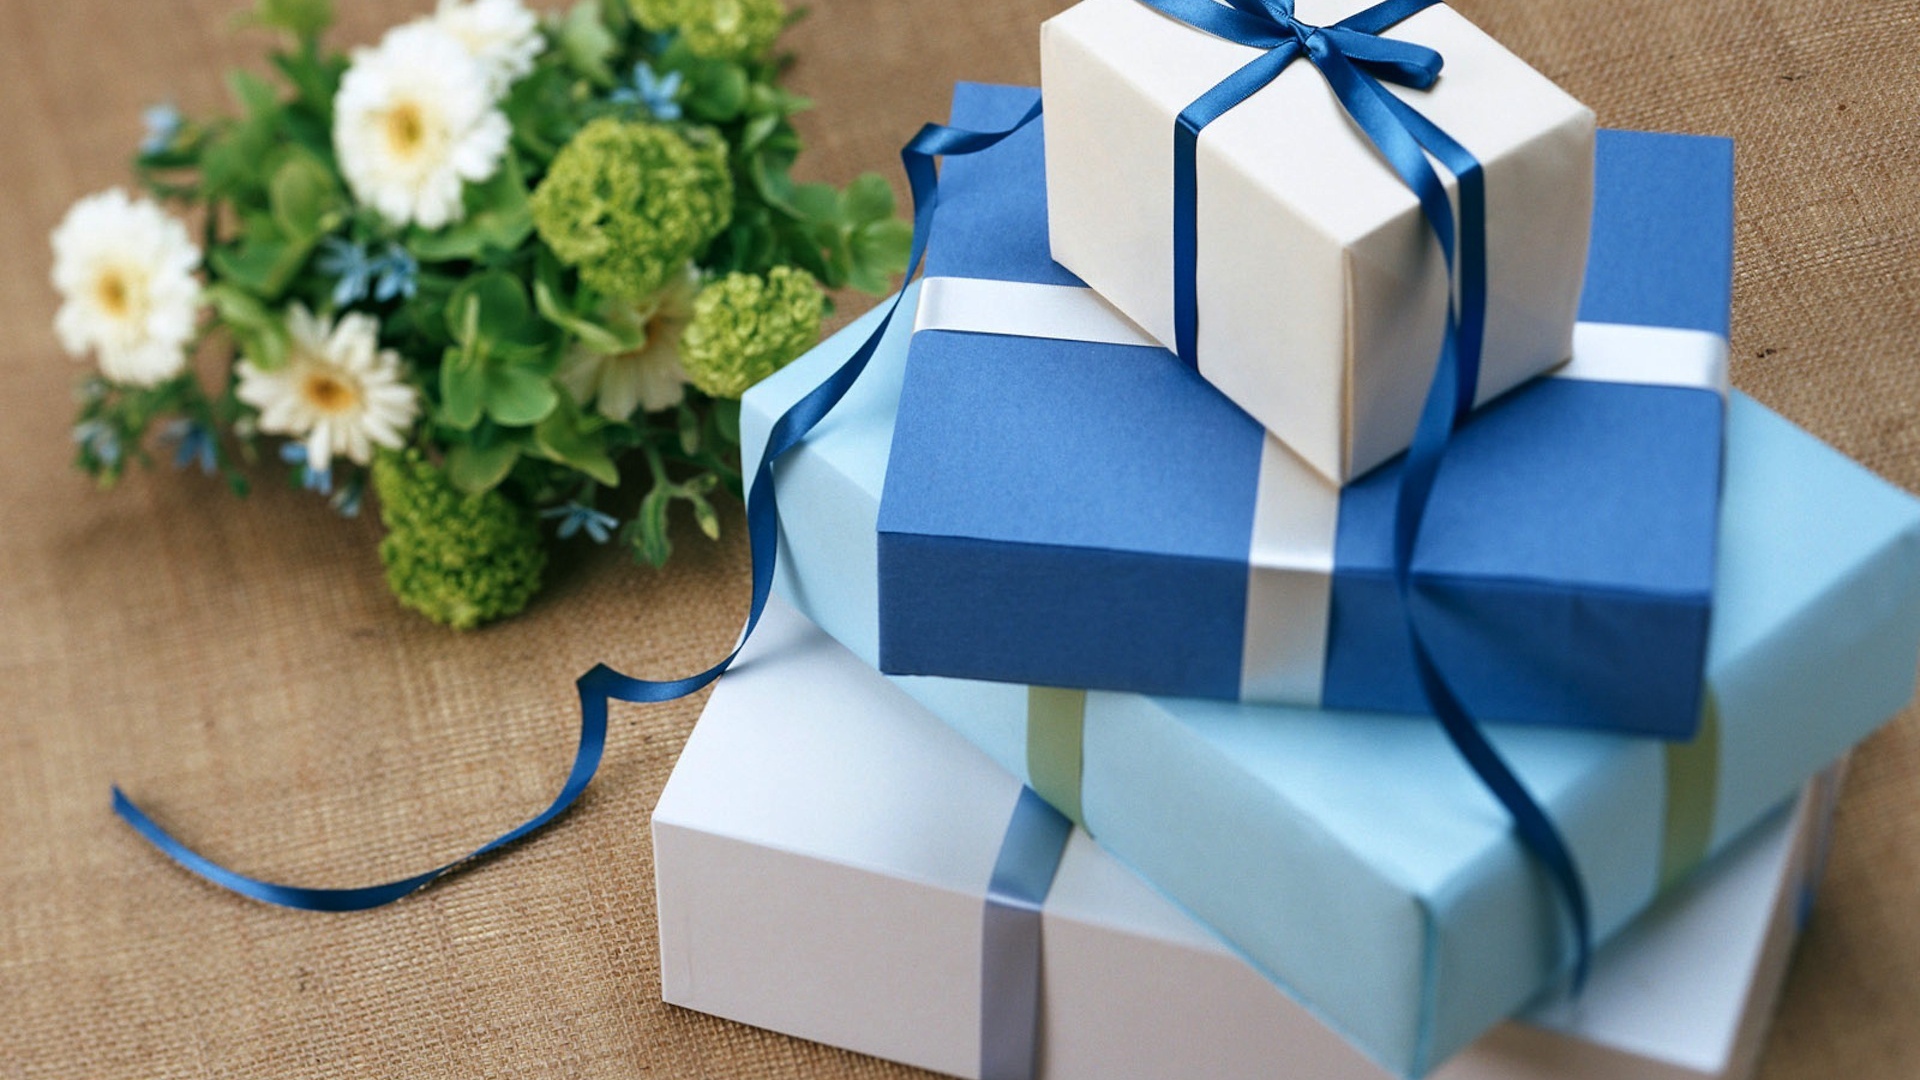 Bouquet and boxes with gifts for your favorite on March 8